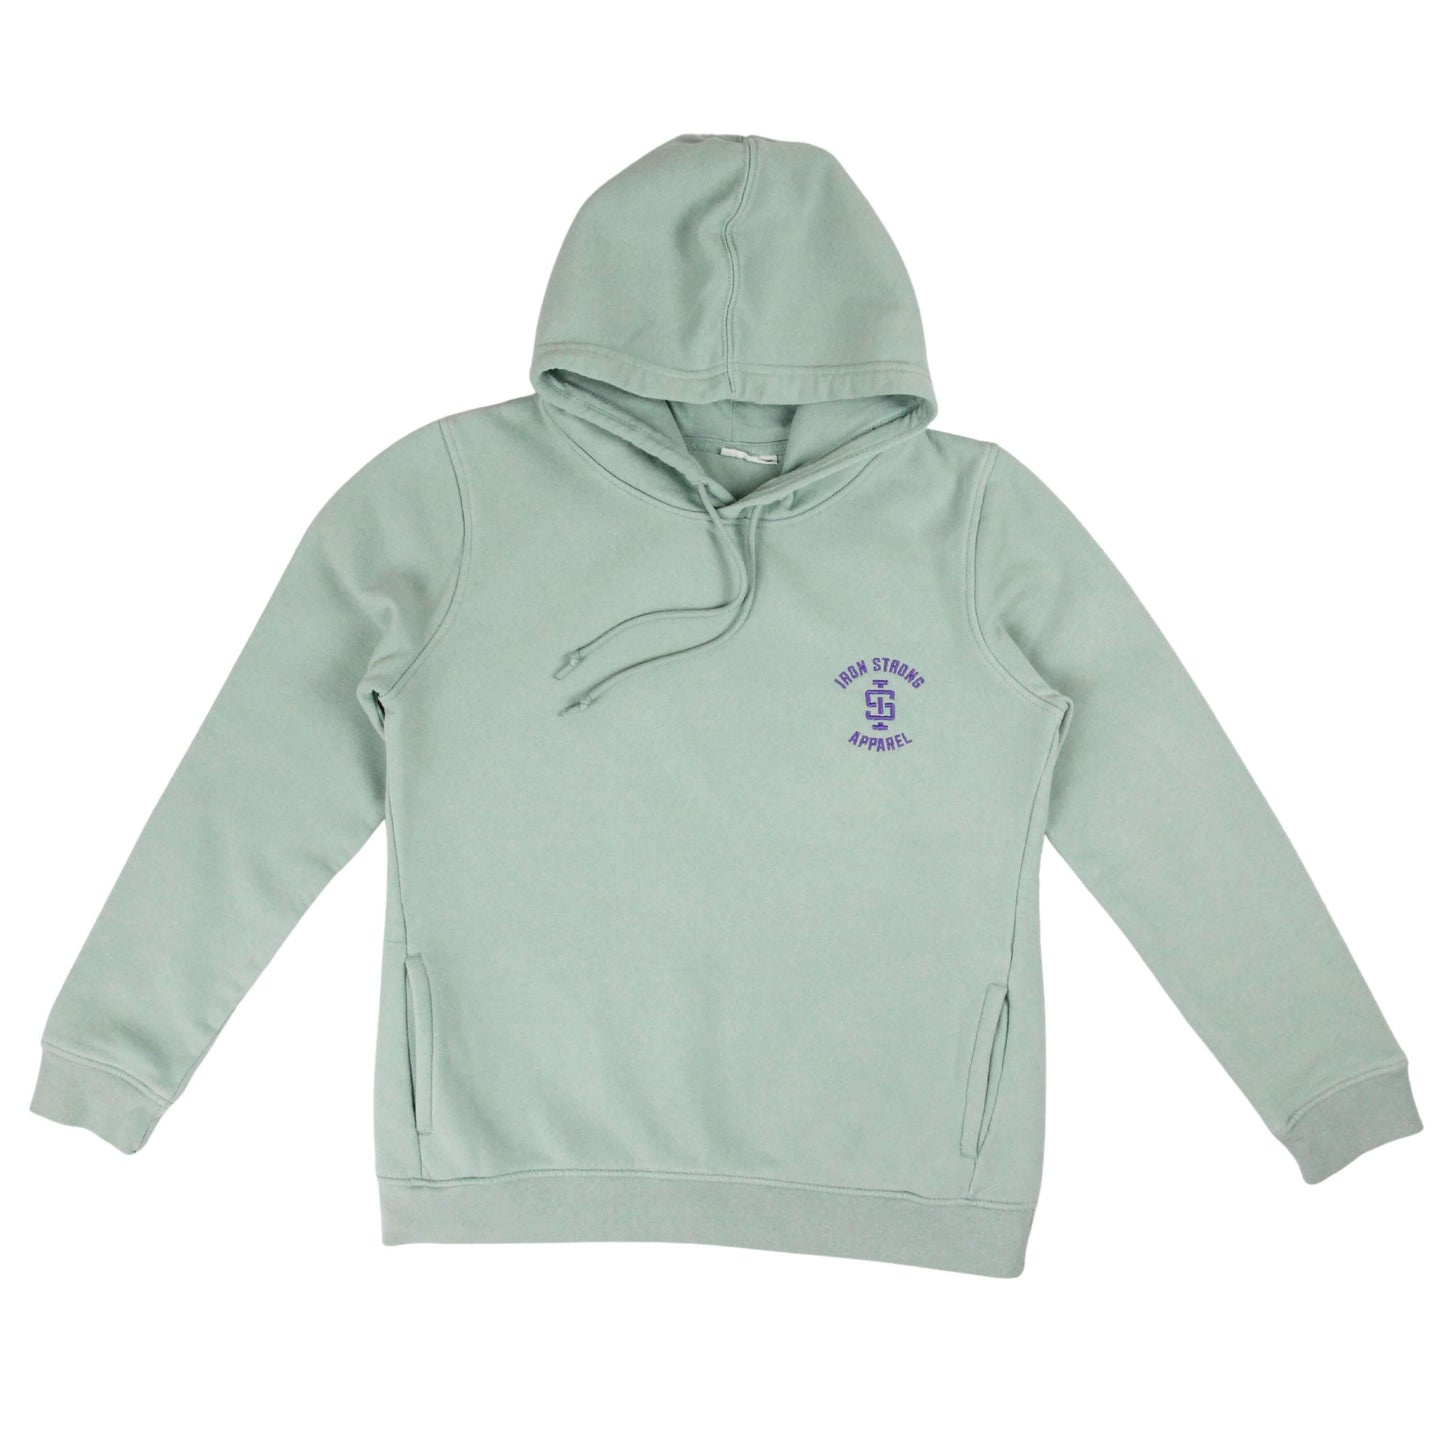 Sage weightlifting Eco Hoodie | Iron Strong Apparel